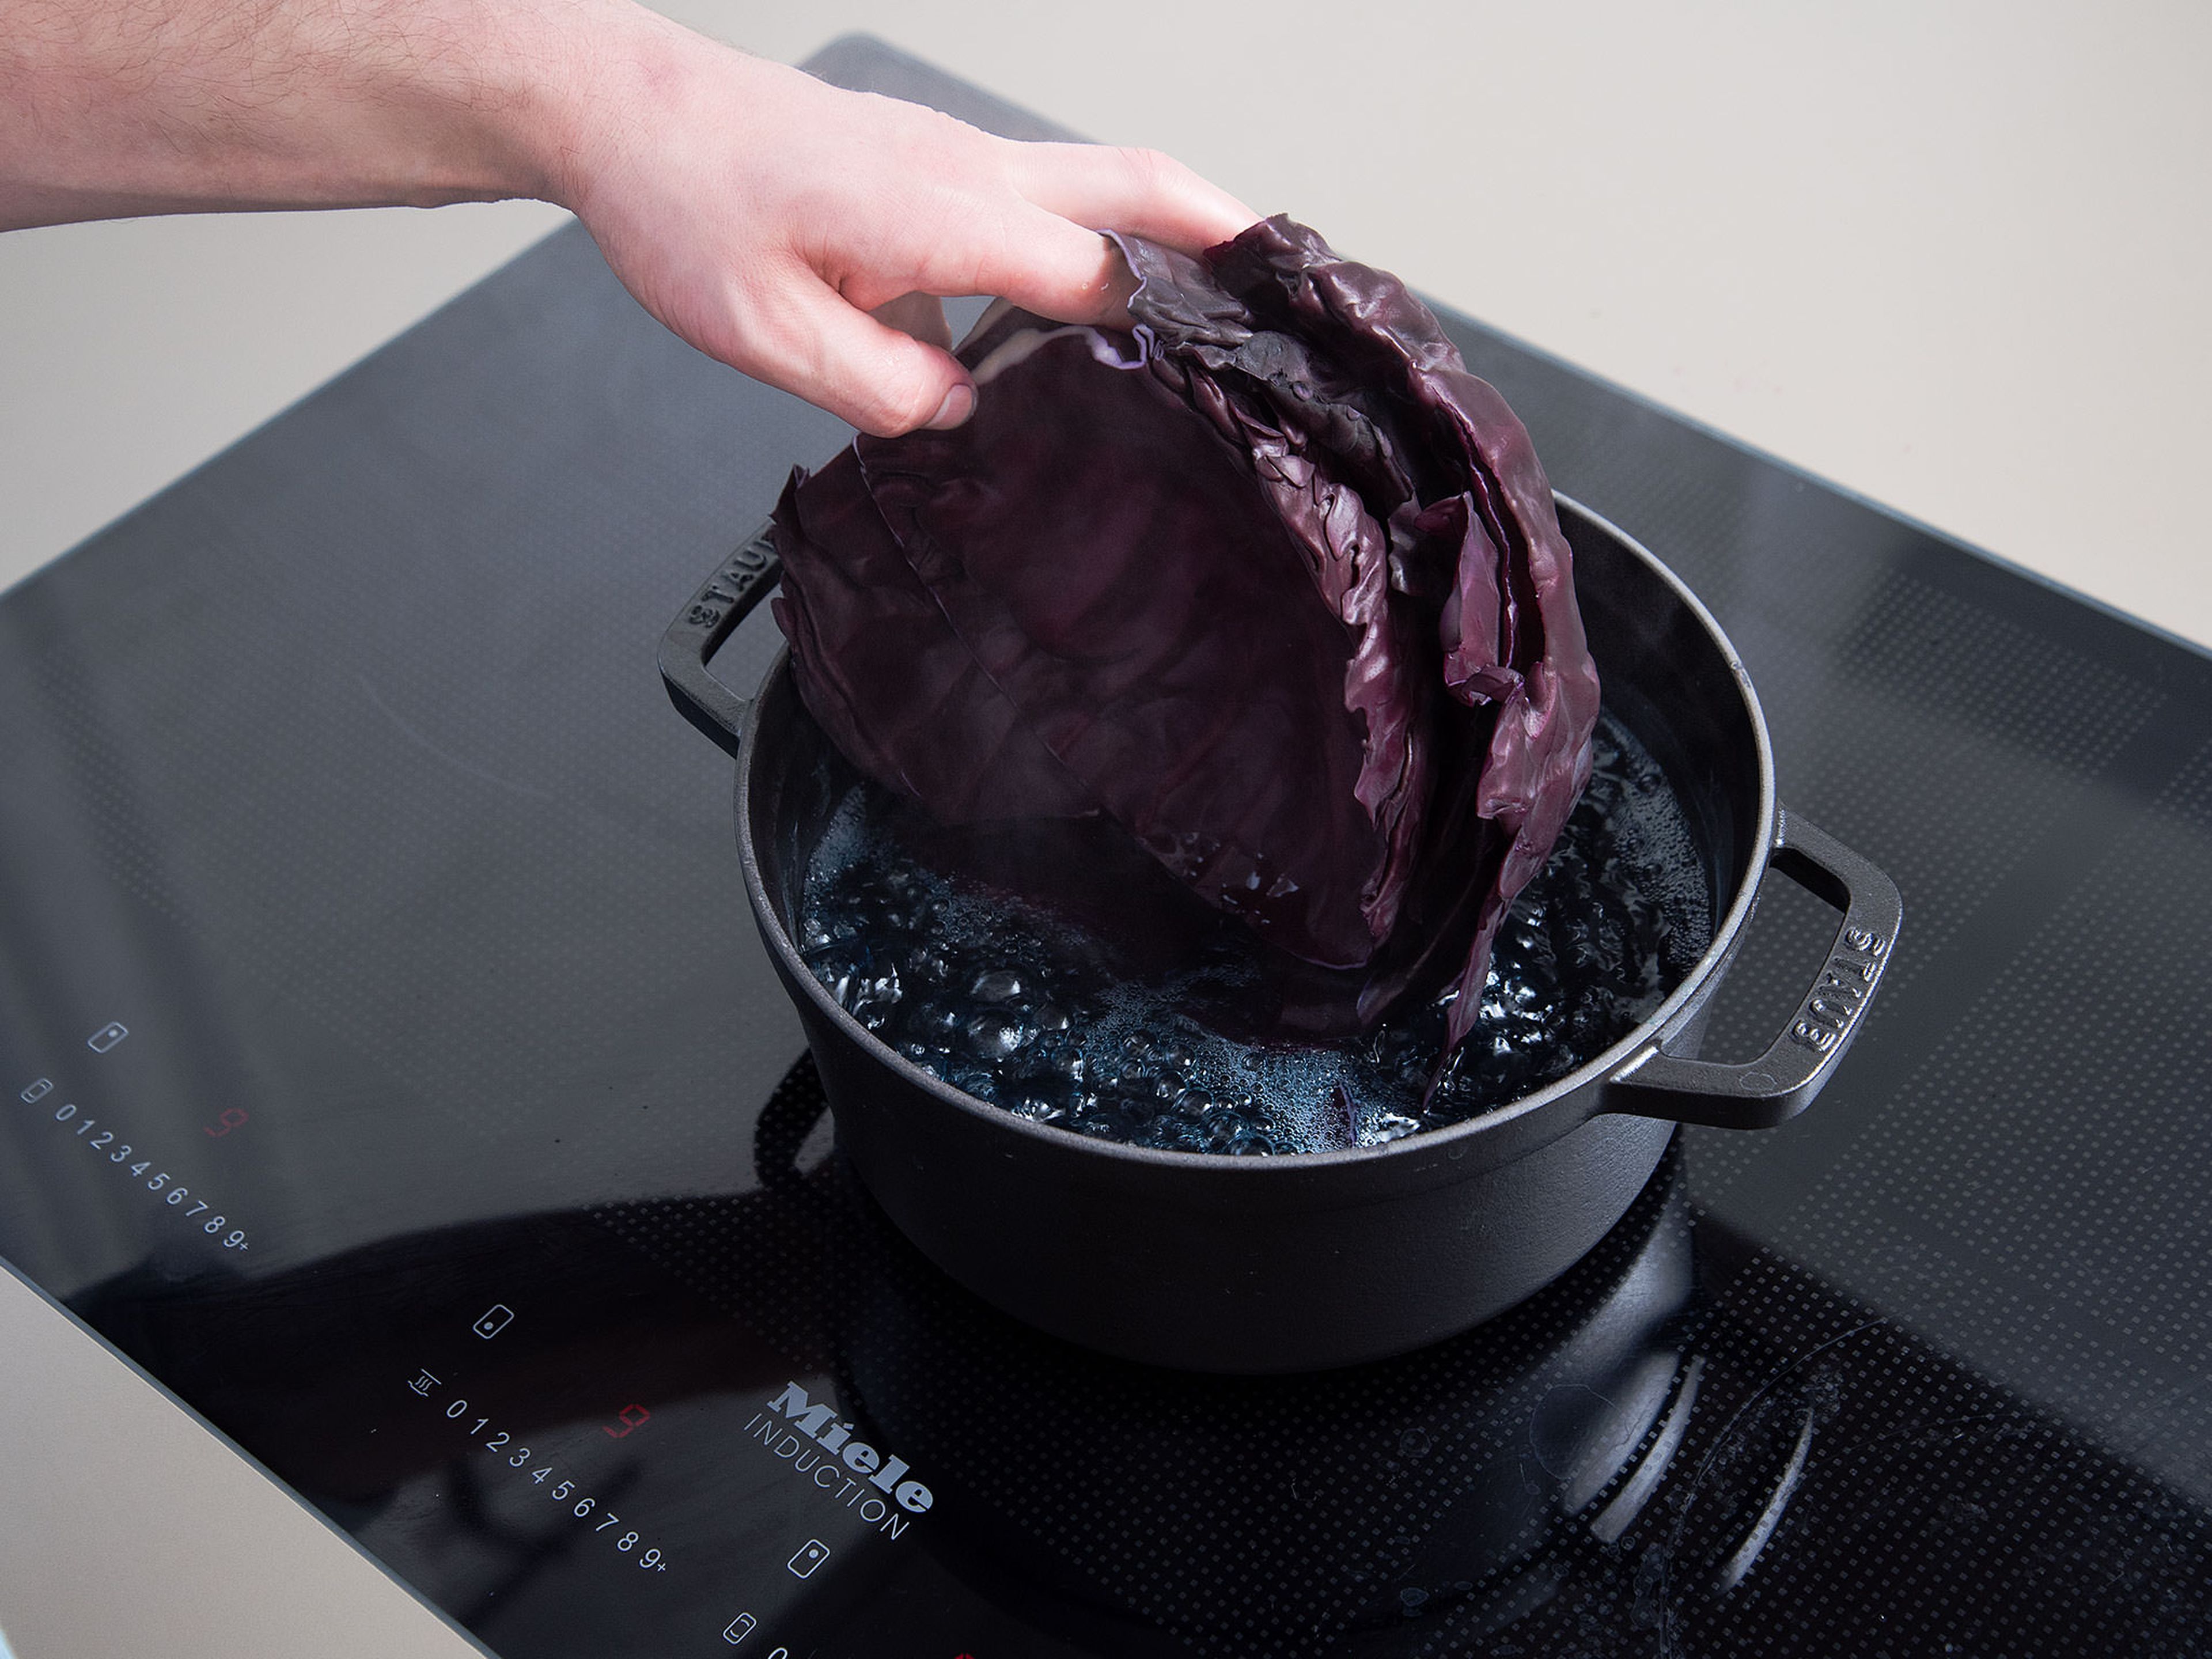 Preheat oven to 170°C/340°F. Remove outer leaves and stem from a red cabbage and discard, then carefully remove some inner leaves. Blanch in salted boiling water, then transfer directly to an ice bath. Set aside.